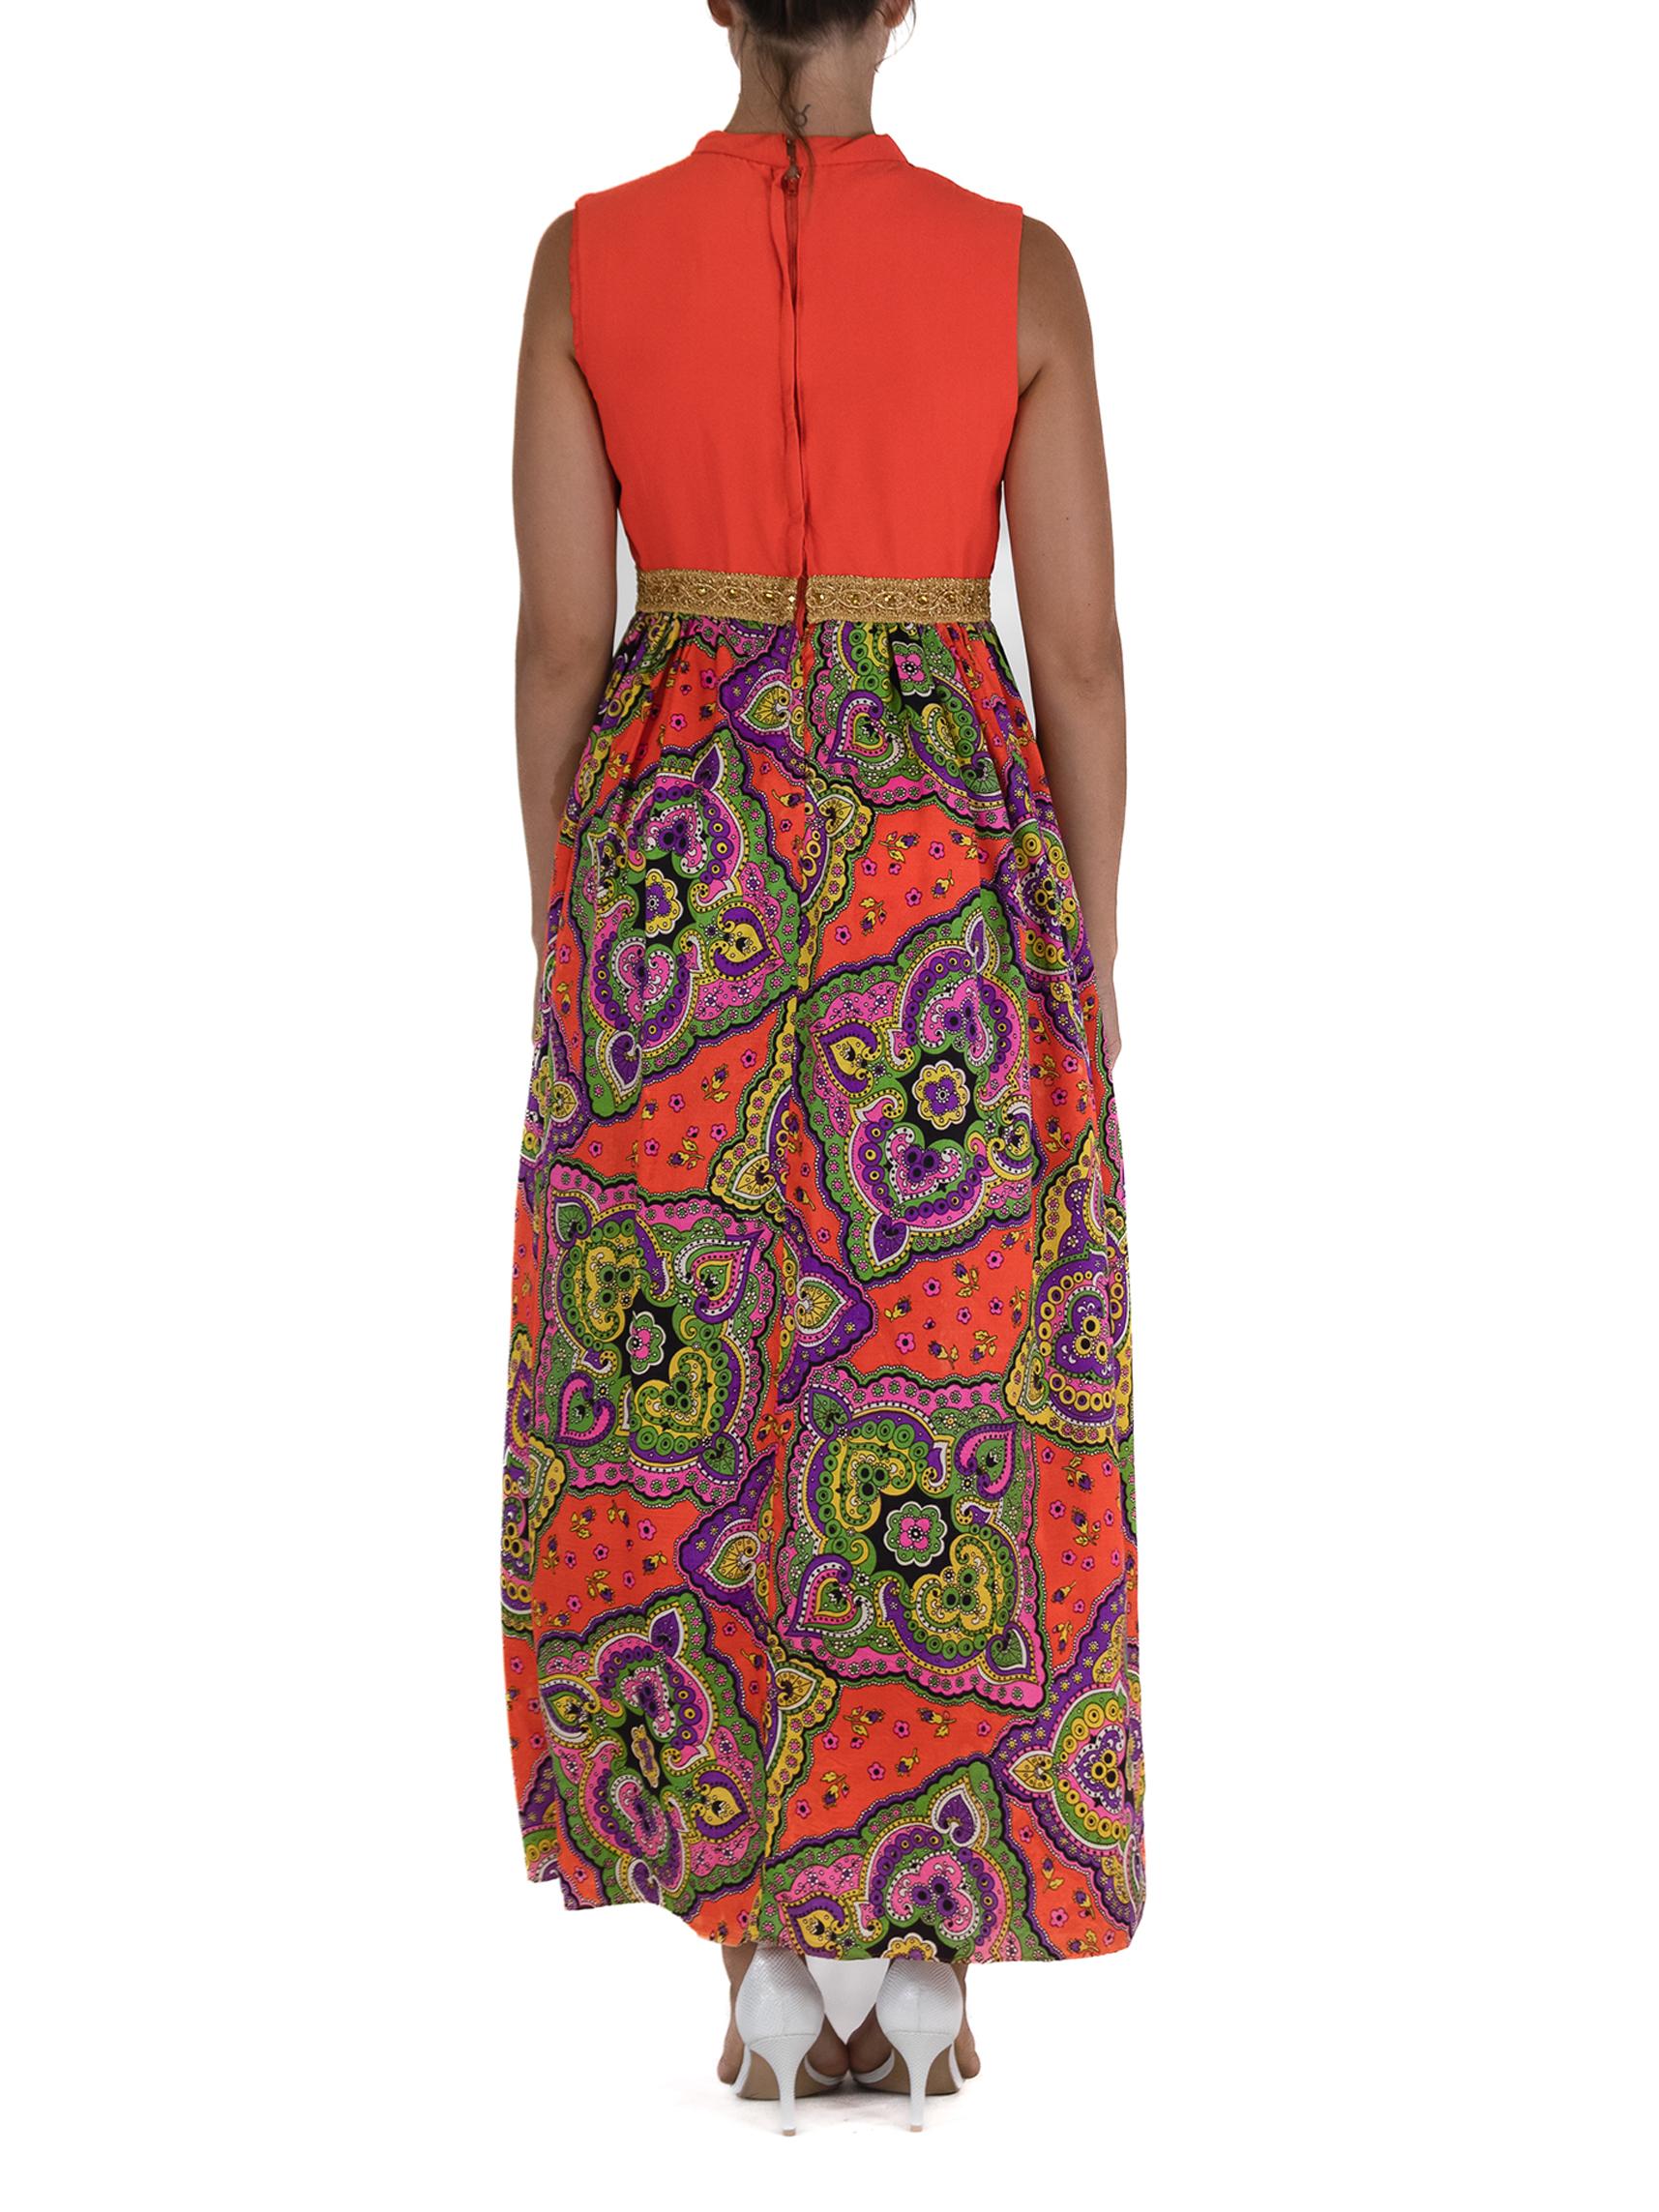 1970S Orange Psychedelic Paisley Print Dress With Keyhole Neck And Gold Braided For Sale 2